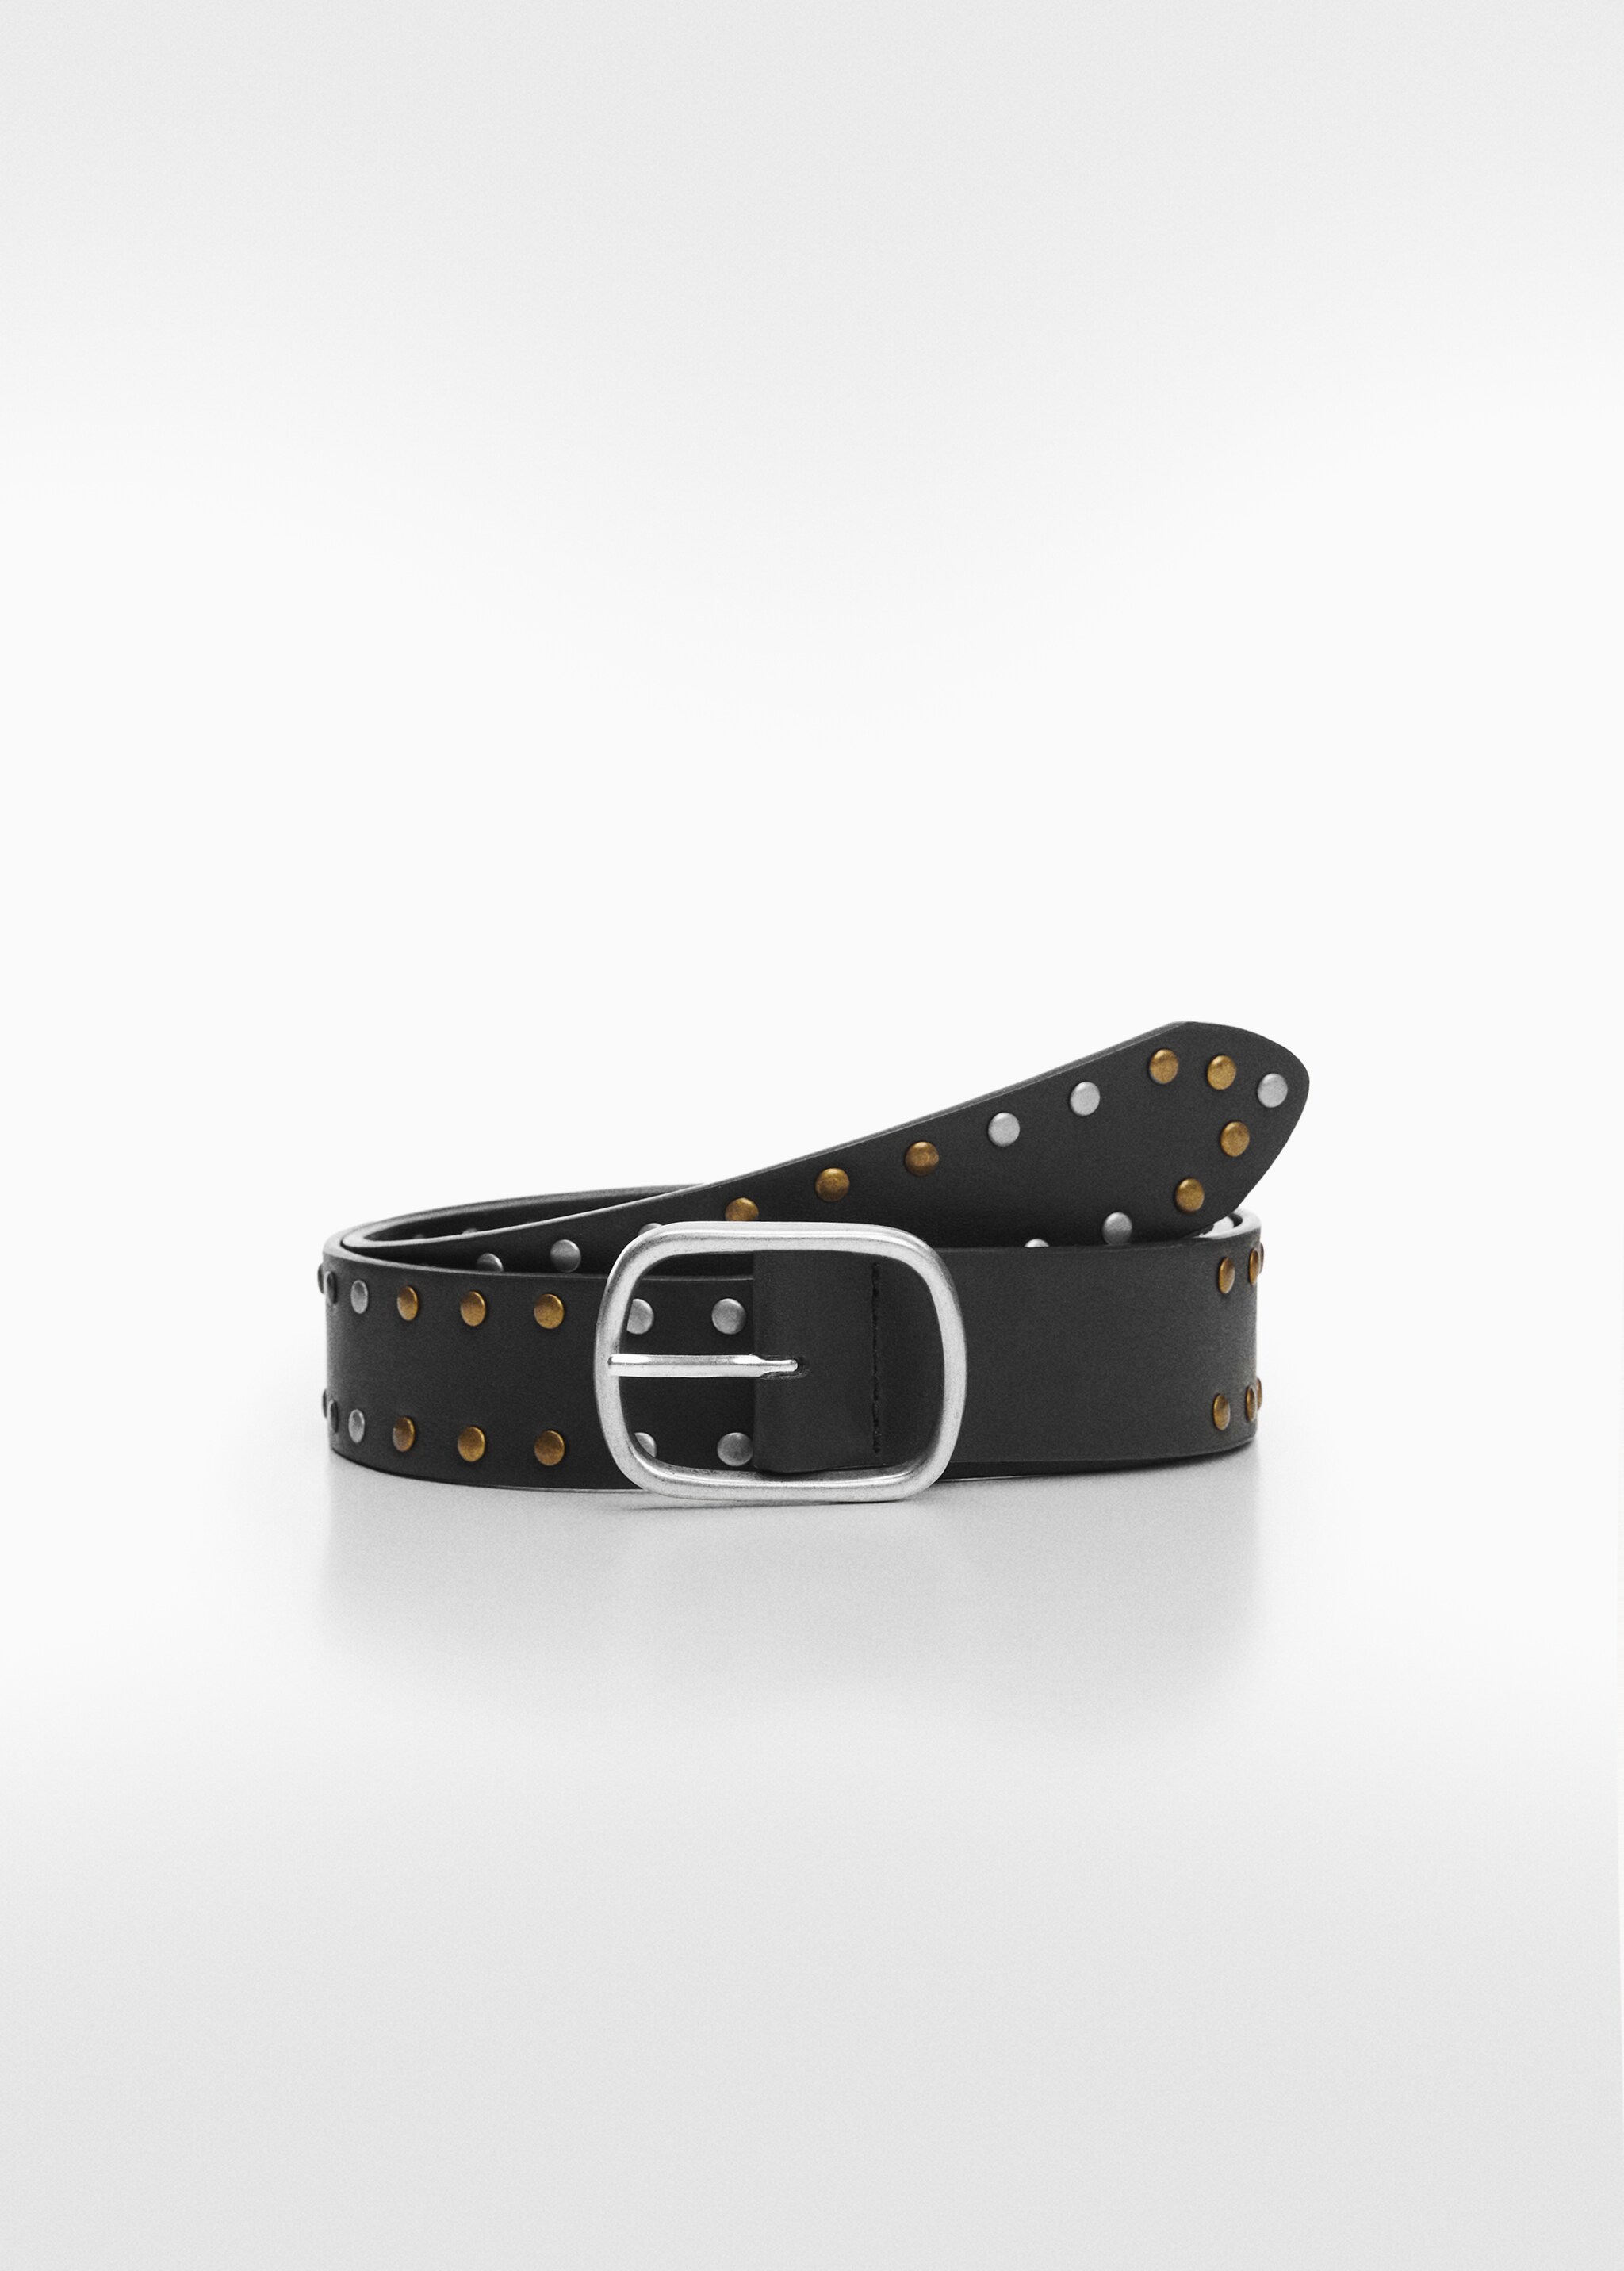 Studded belt - Article without model